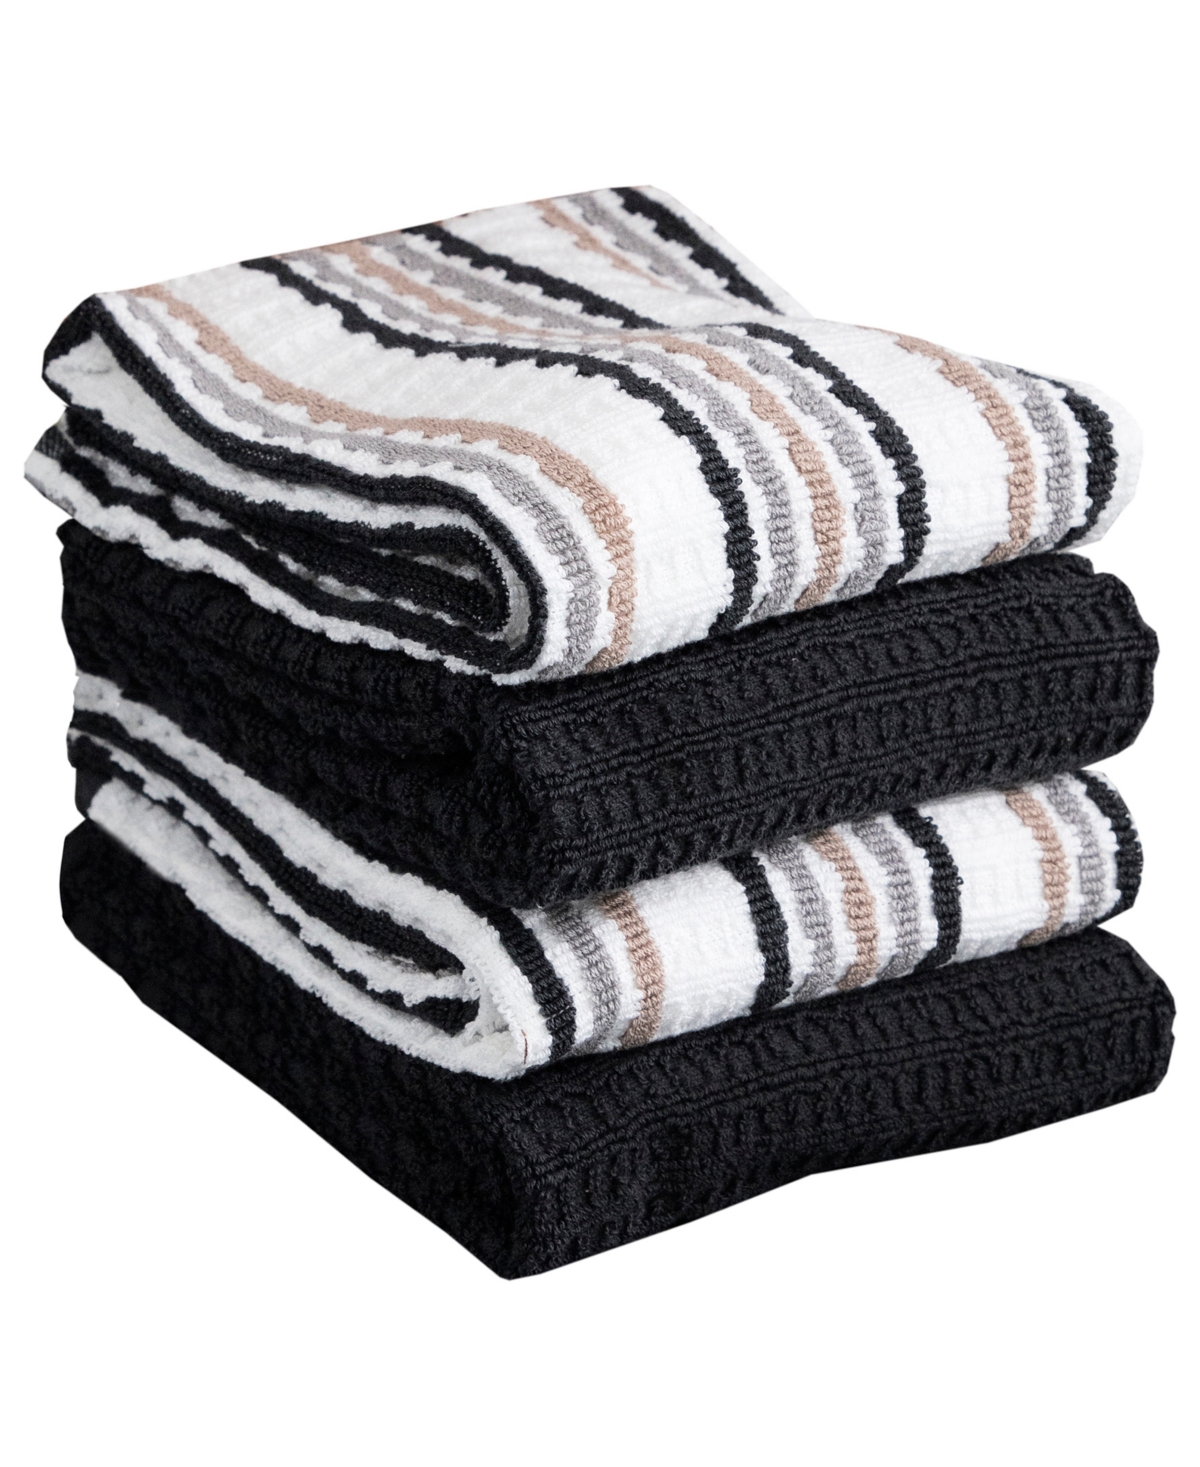 Solid and Stripe Waffle Kitchen Towel, Set of 4 - Charcoal